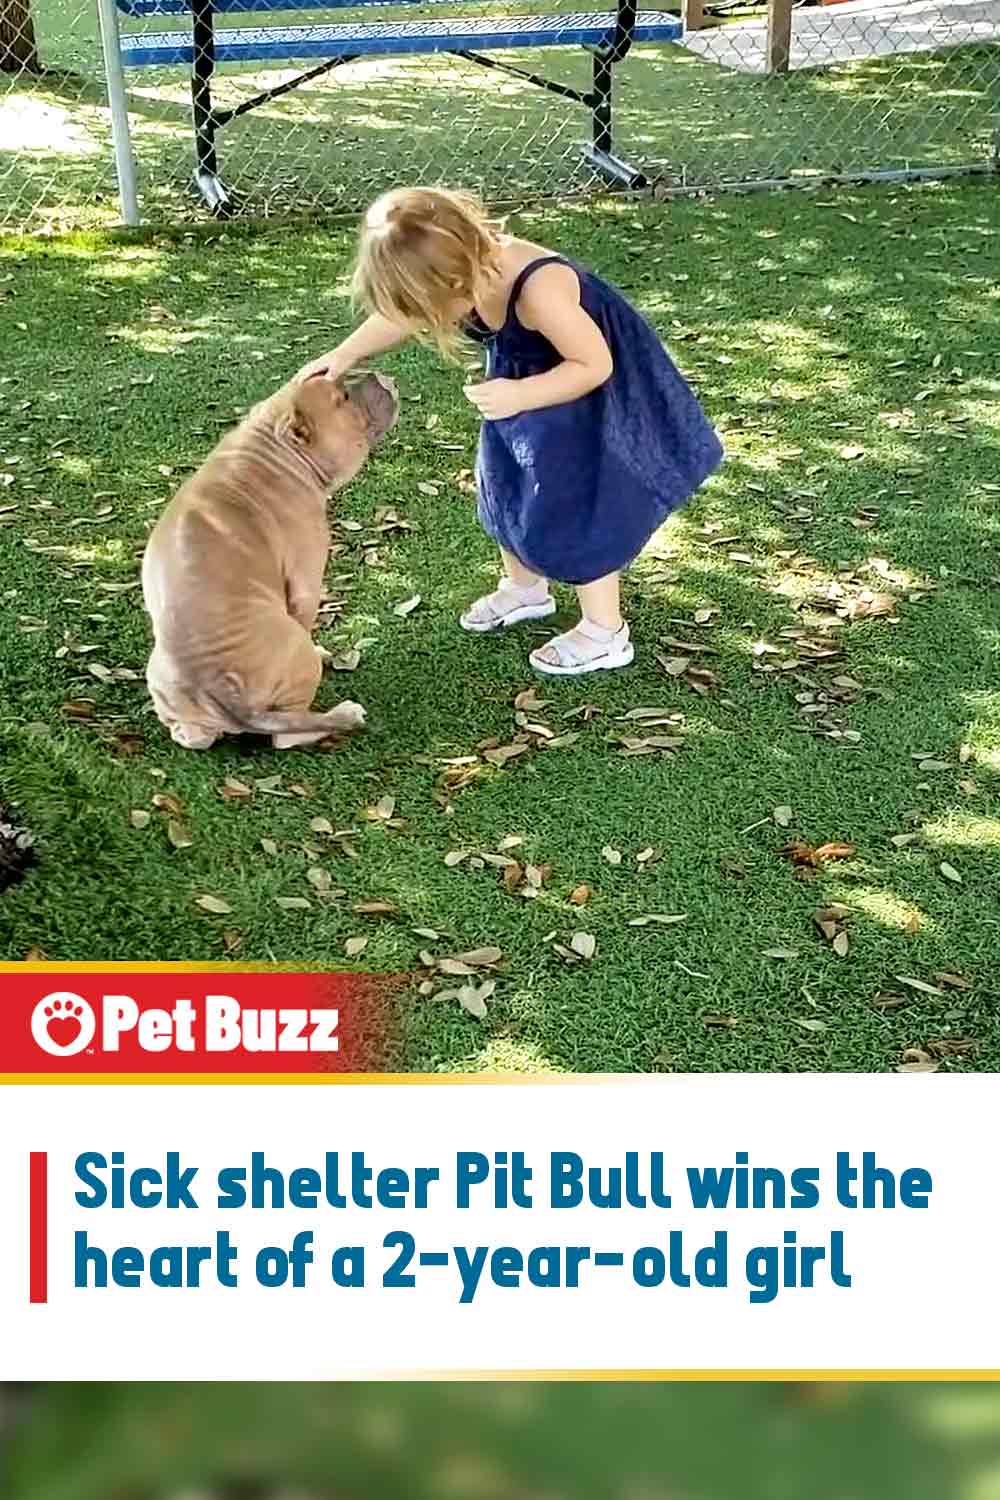 Sick shelter Pit Bull wins the heart of a 2-year-old girl